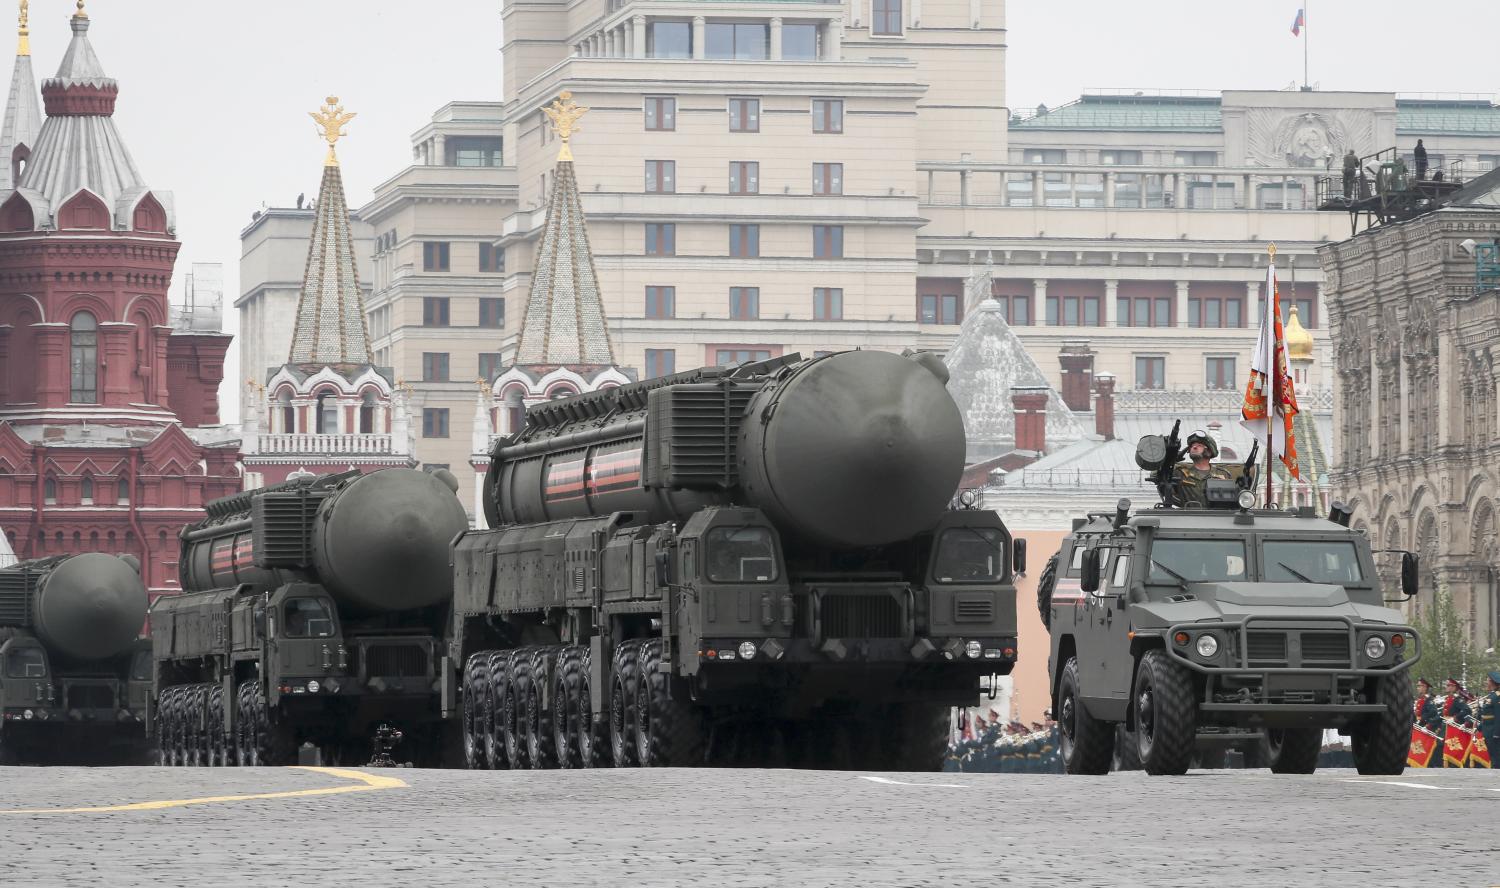 Russian servicemen drive Yars RS-24 intercontinental ballistic missile systems during the Victory Day parade, which marks the anniversary of the victory over Nazi Germany in World War Two, in Red Square in central Moscow, Russia May 9, 2019. REUTERS/Shamil Zhumatov